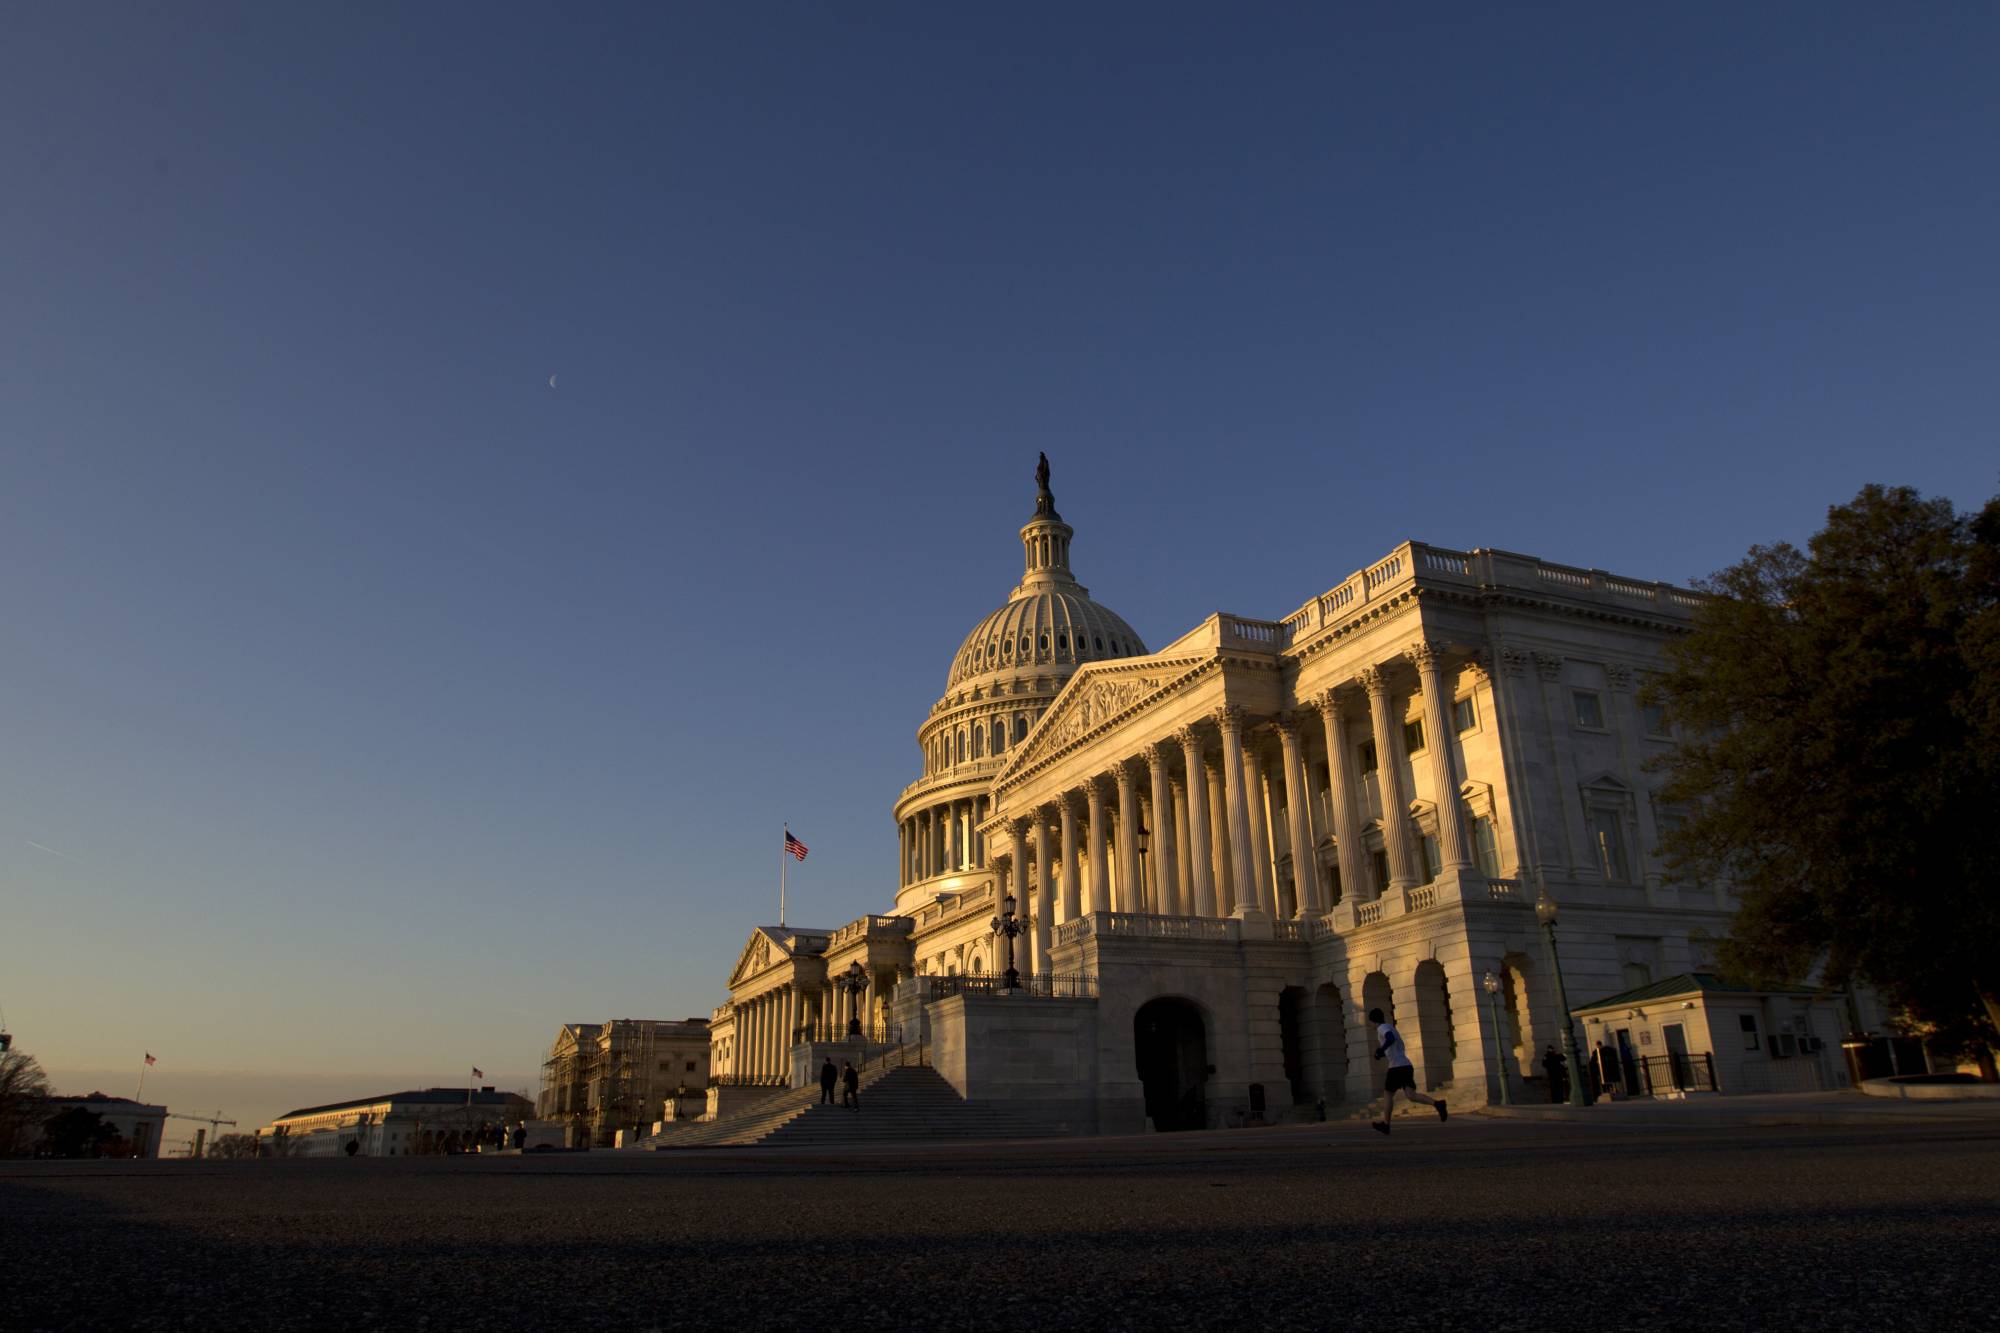 The U.S. Capitol is seen during a sunrise in Washington, Wednesday Feb. 27, 2019. Michael Cohen, President Donald Trump's former personal lawyer, will testify today before the House Oversight and Reform Committee in an open hearing. (AP Photo/Jose Luis Magana)